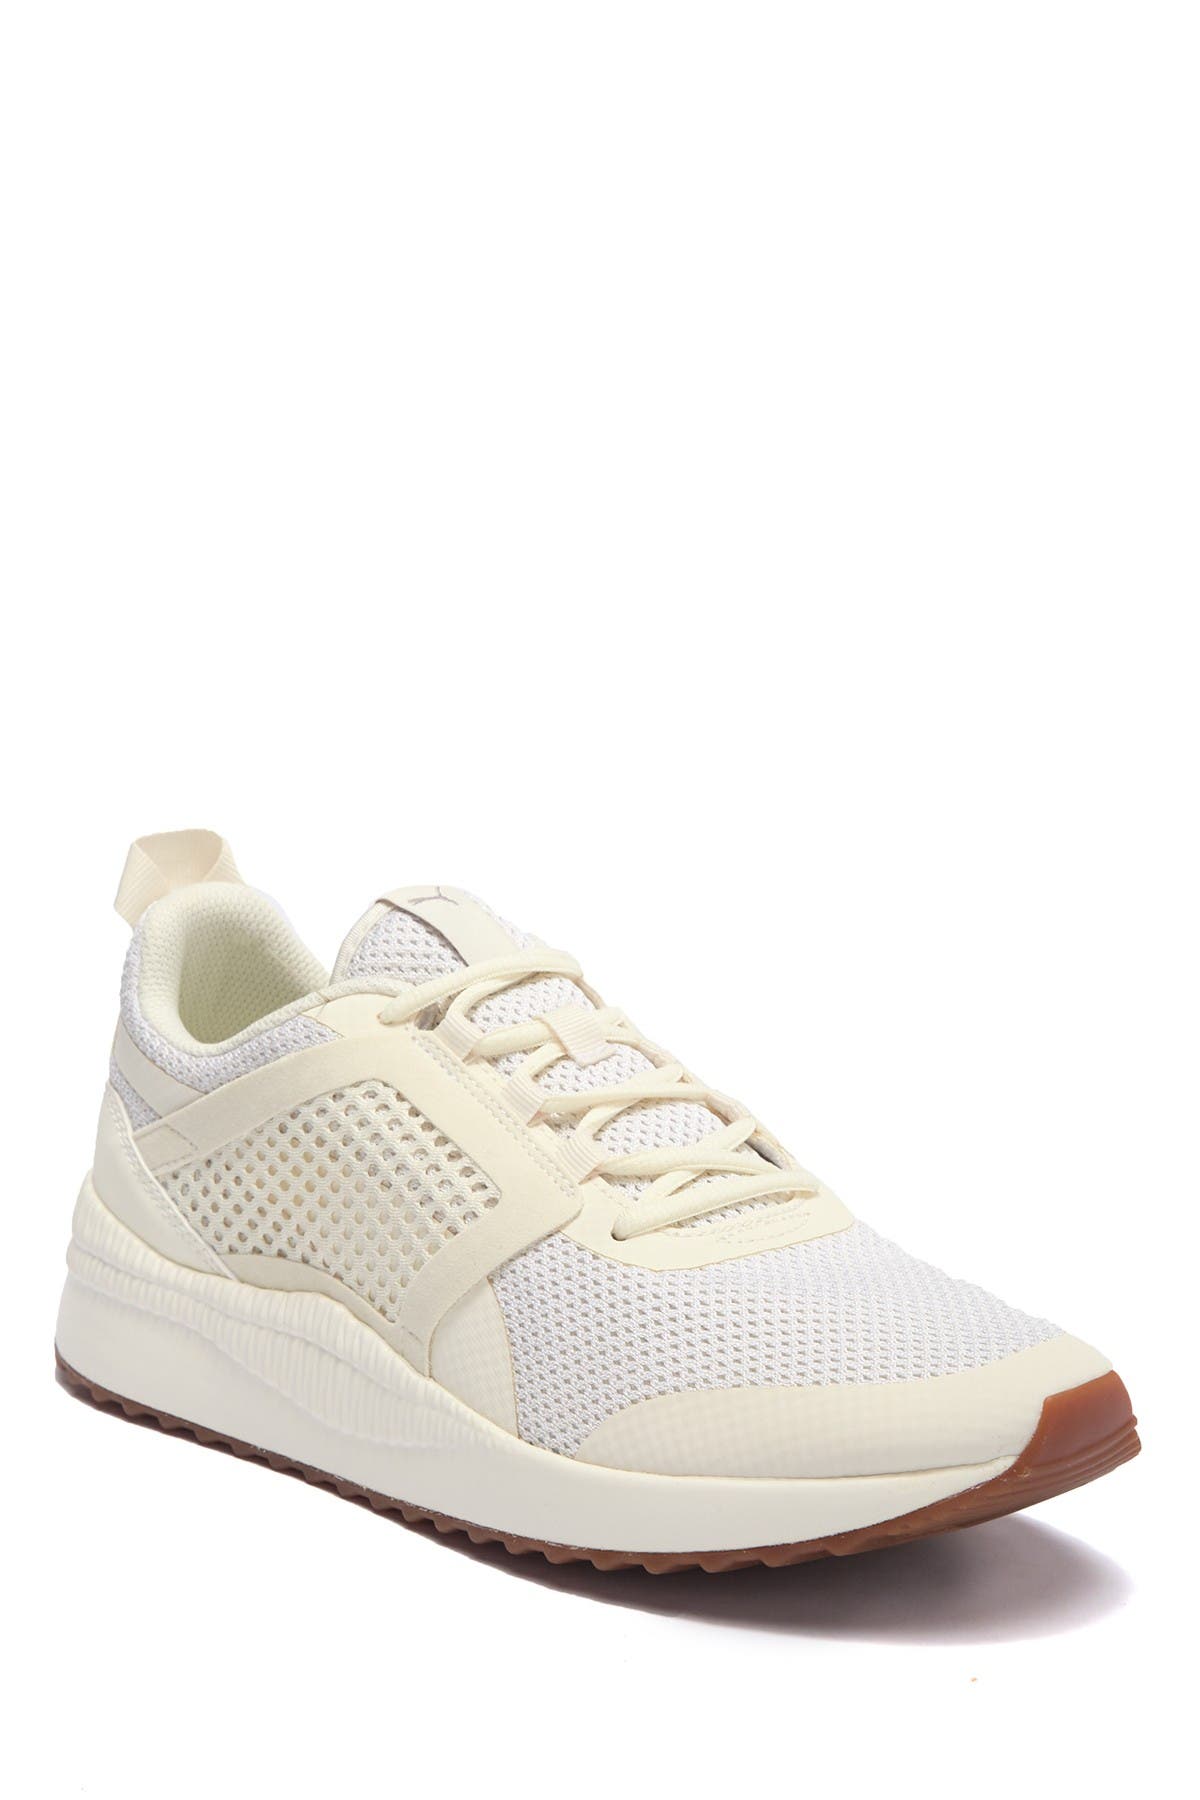 pacer next net sneakers